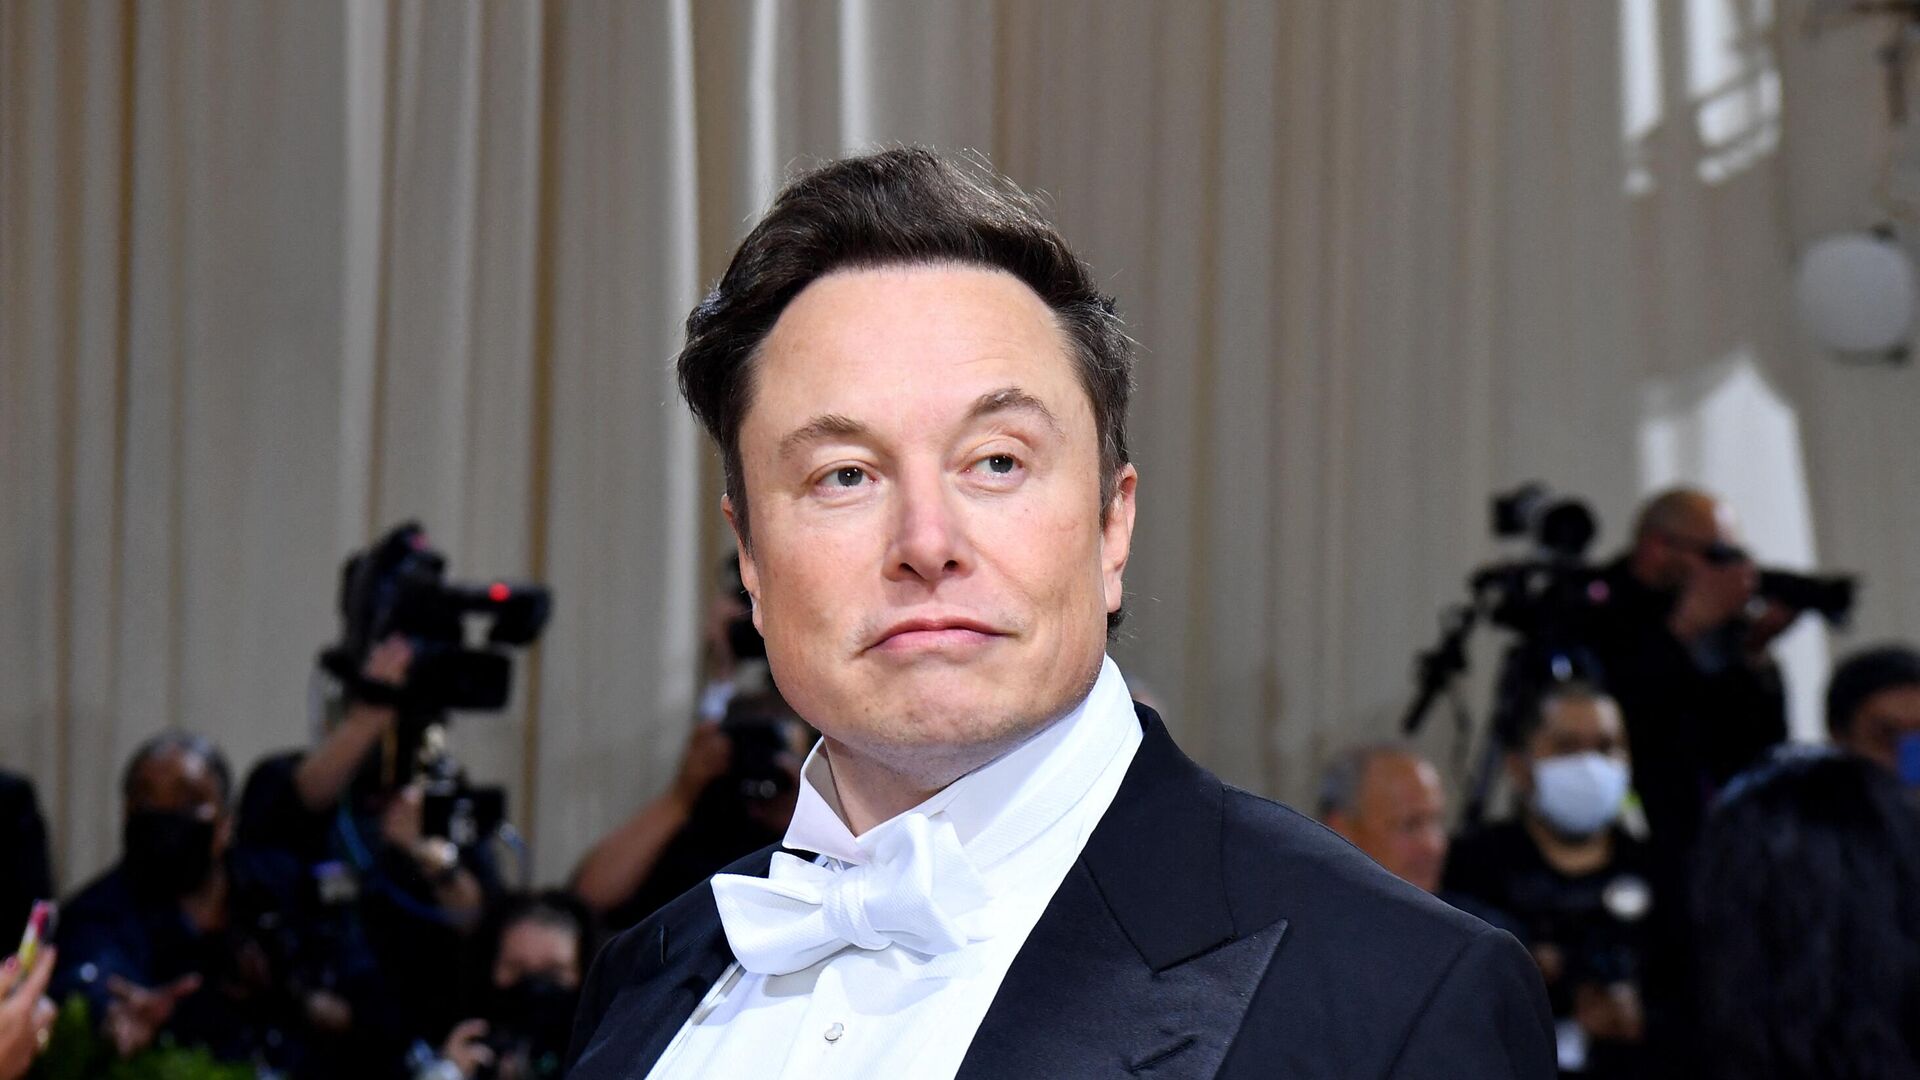 CEO, and chief engineer at SpaceX, Elon Musk, arrives for the 2022 Met Gala at the Metropolitan Museum of Art on May 2, 2022, in New York. - Sputnik India, 1920, 12.01.2023